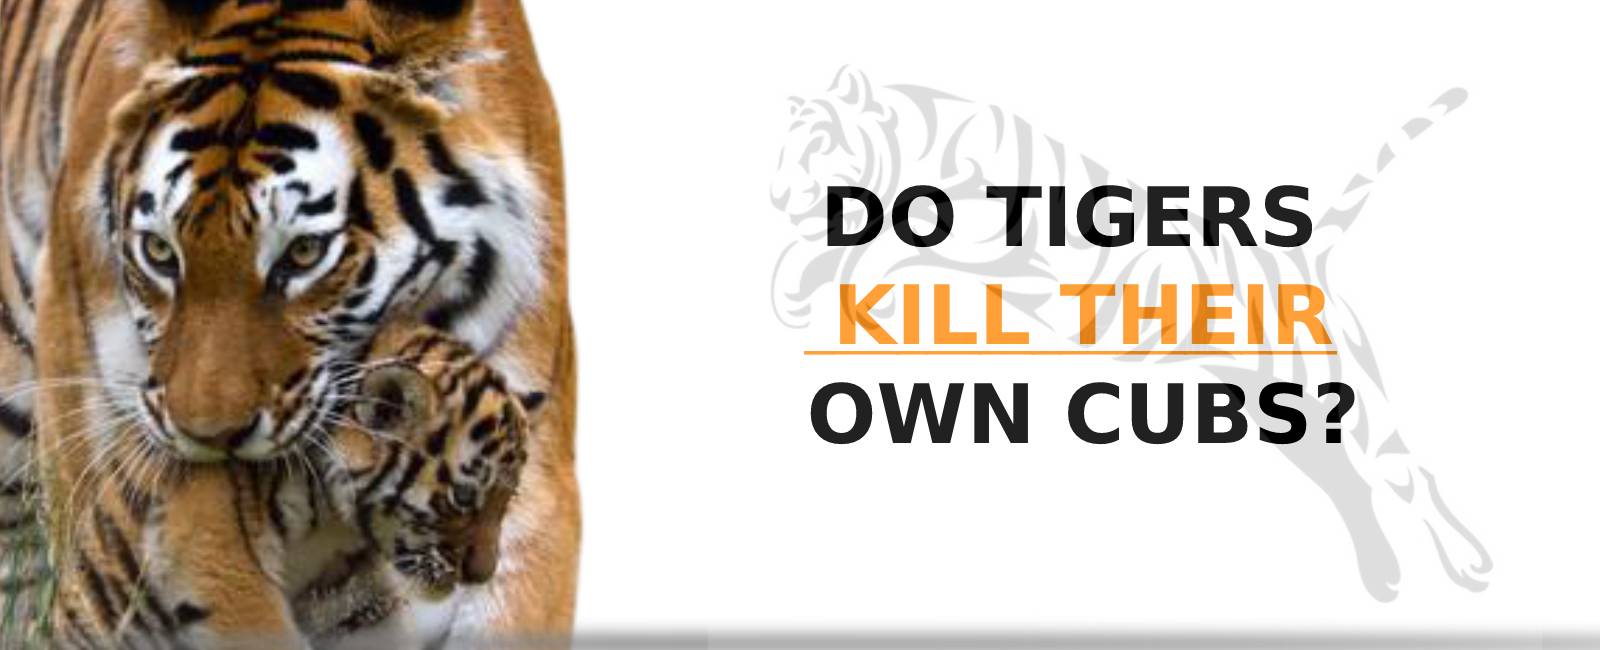 Do Tigers Kill Their Own Babies? Tiger-Universe